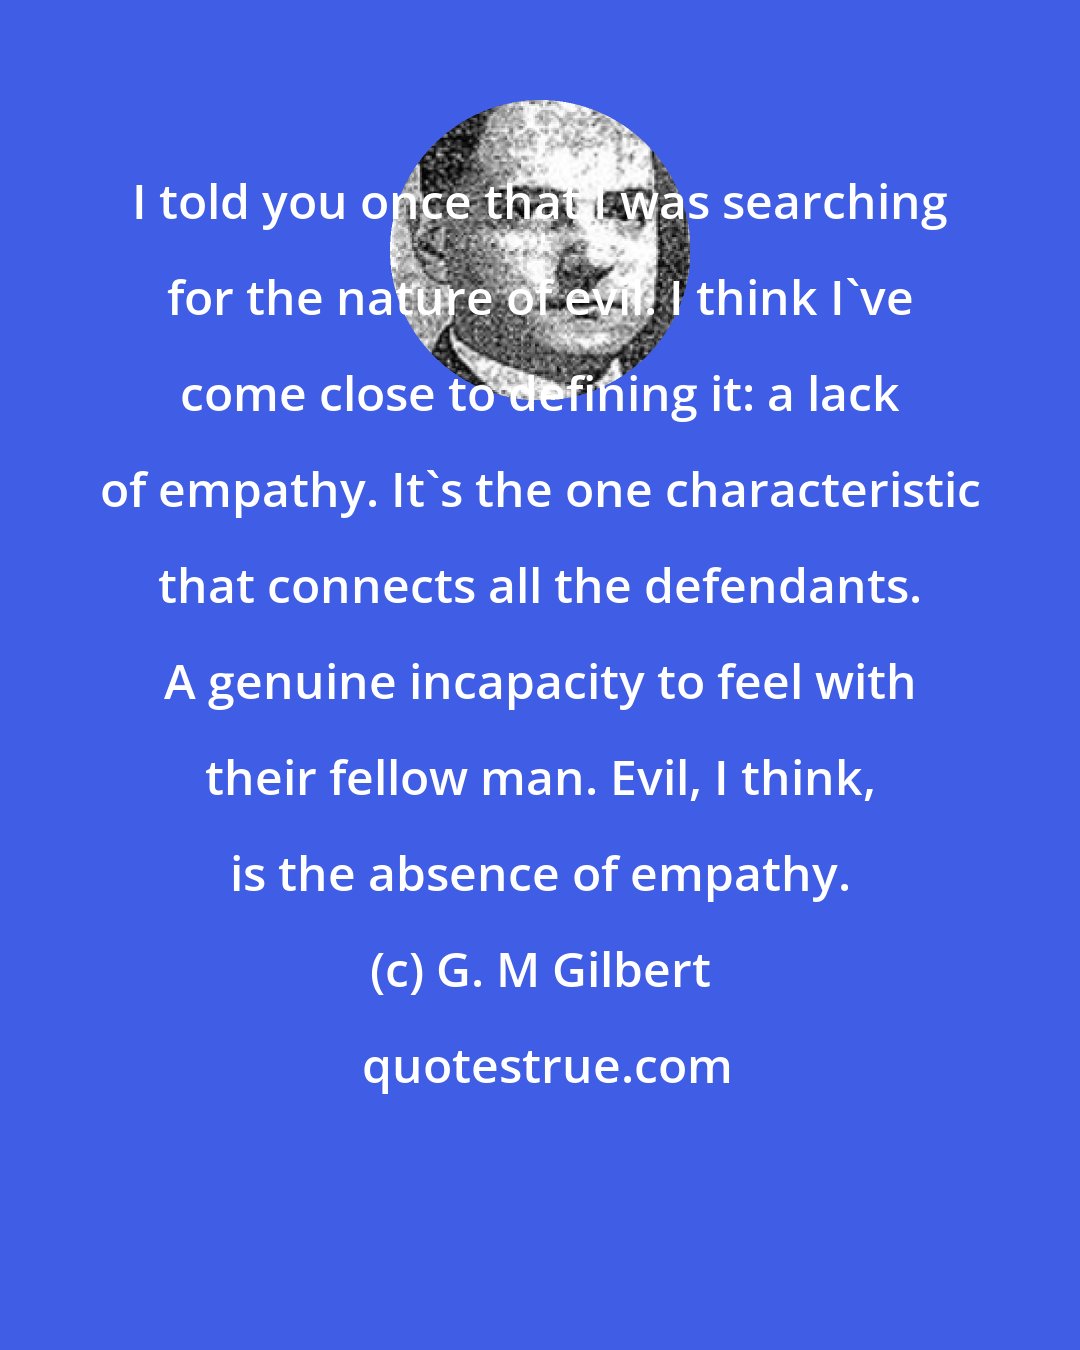 G. M Gilbert: I told you once that I was searching for the nature of evil. I think I've come close to defining it: a lack of empathy. It's the one characteristic that connects all the defendants. A genuine incapacity to feel with their fellow man. Evil, I think, is the absence of empathy.